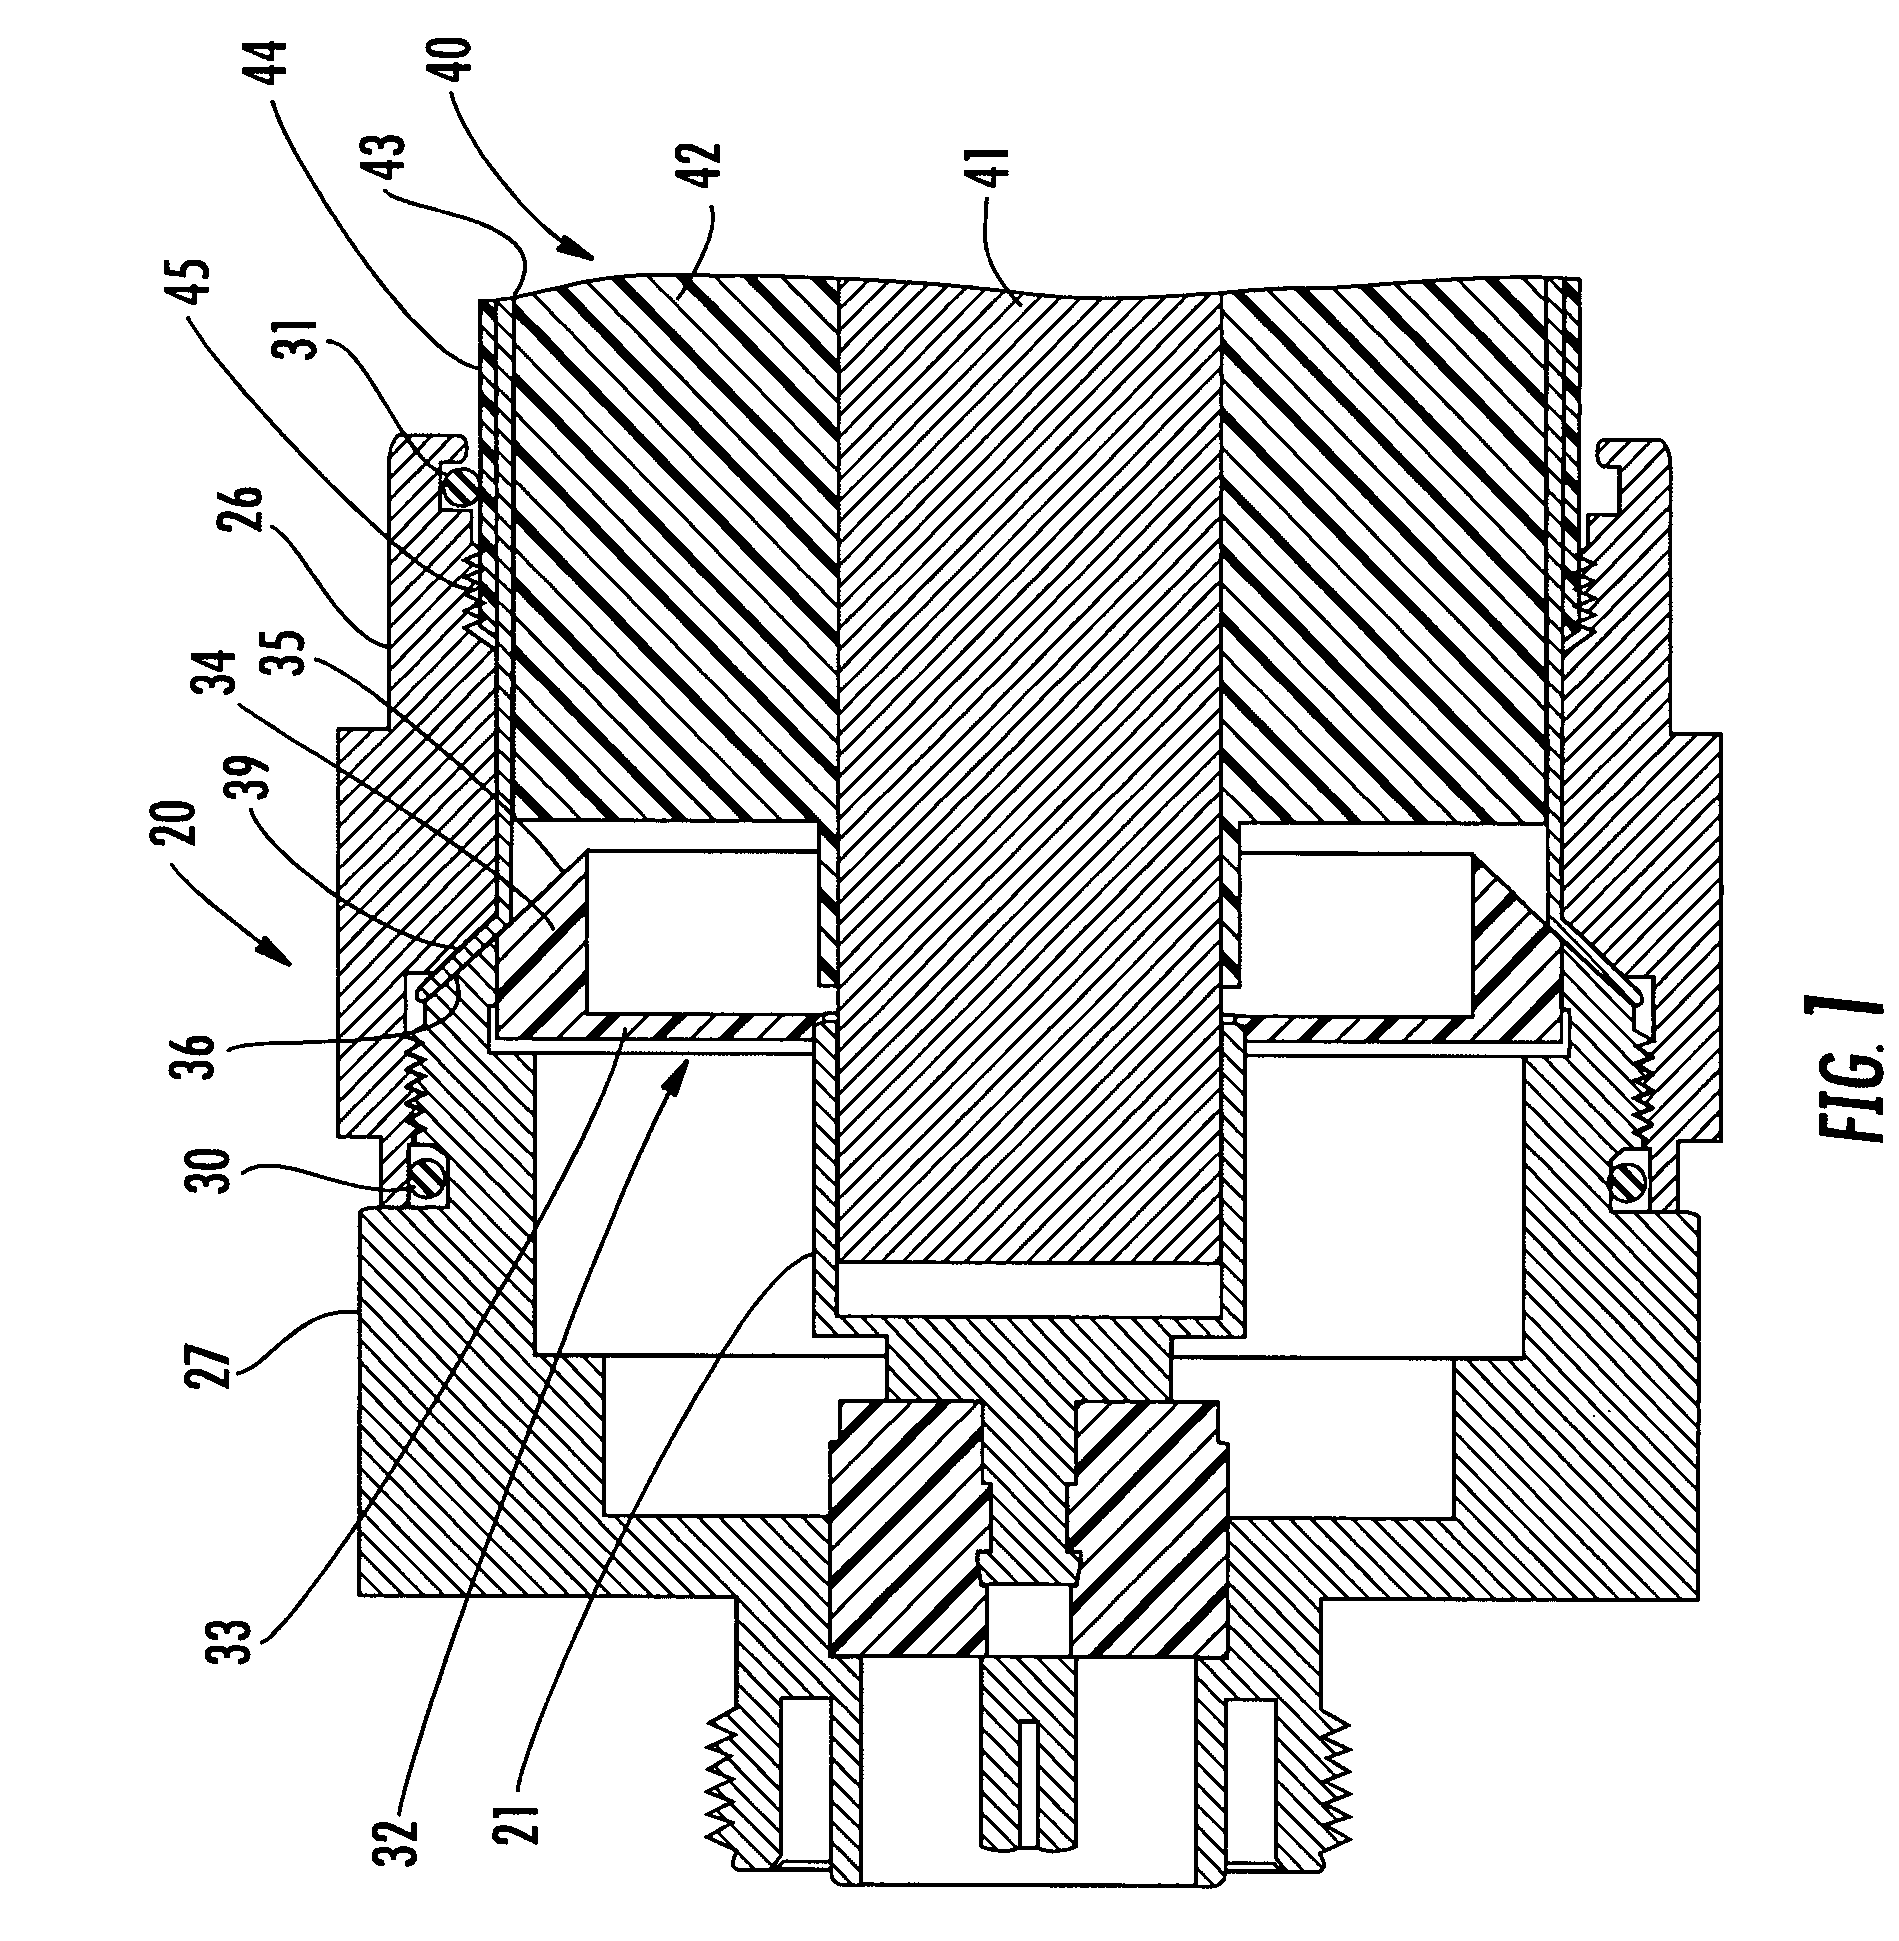 Coaxial connector including clamping ramps and associated method